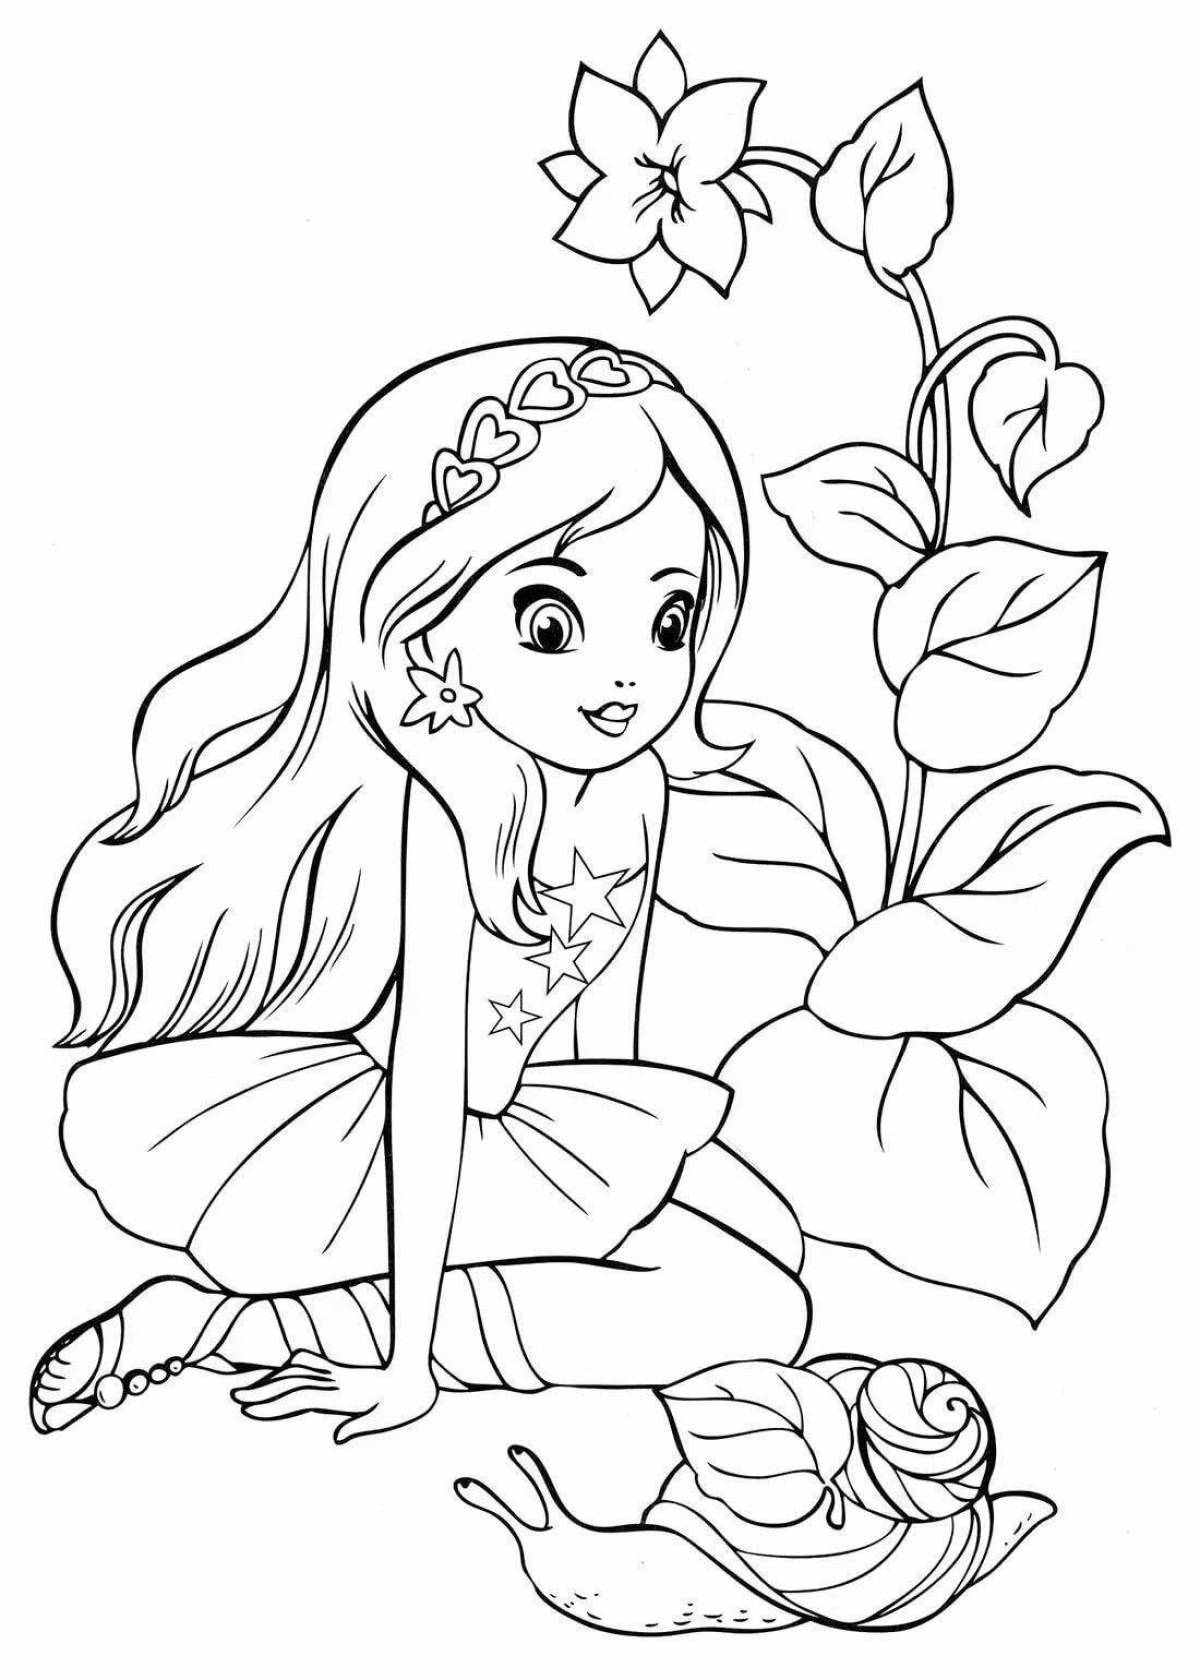 Adorable coloring book for girls and boys